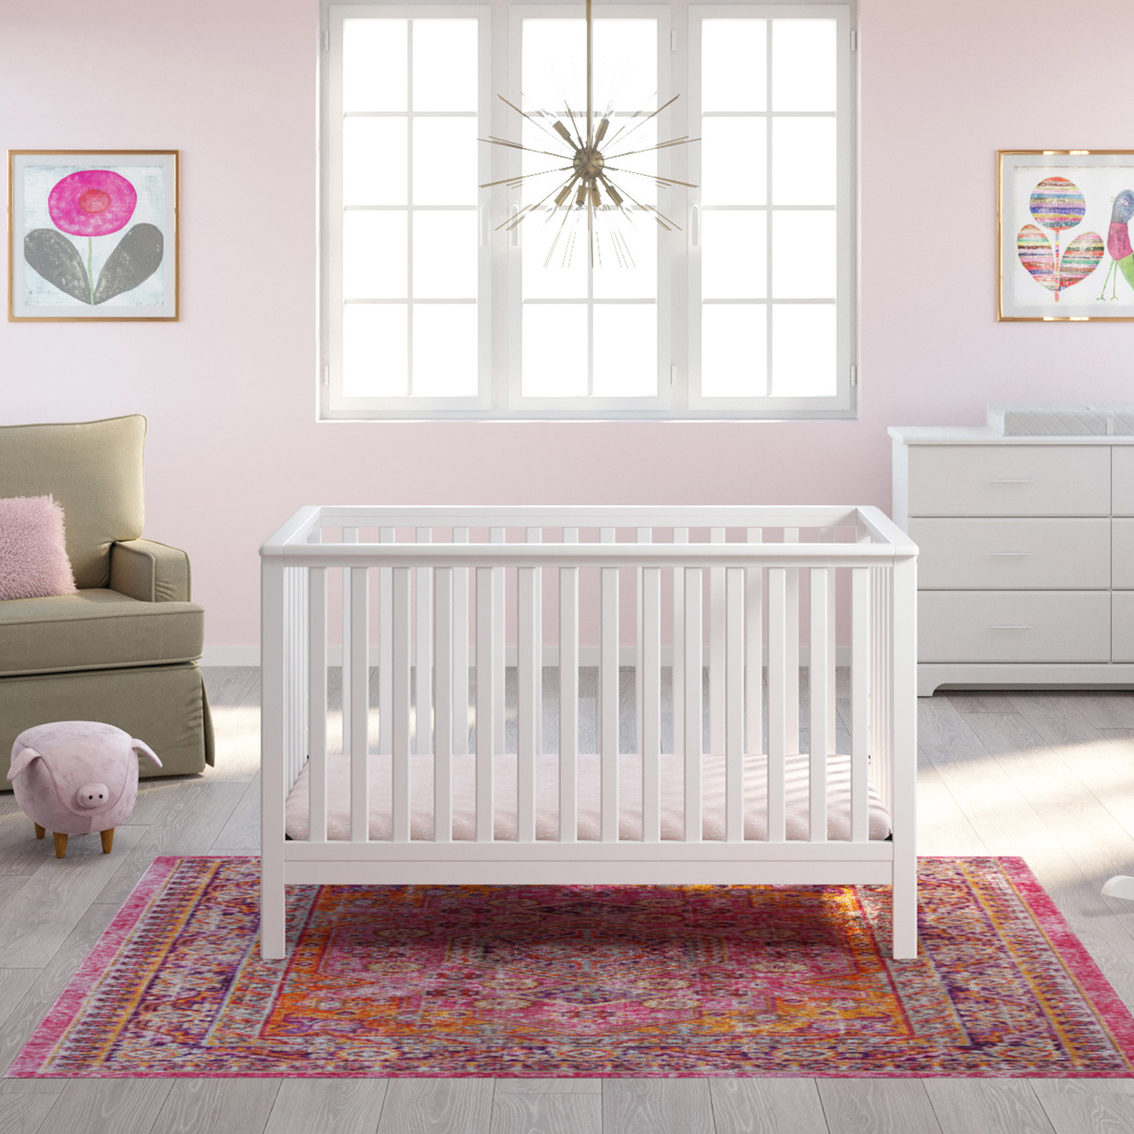 Storkcraft Hillcrest 4 in 1 Convertible Crib - Image 6 of 7